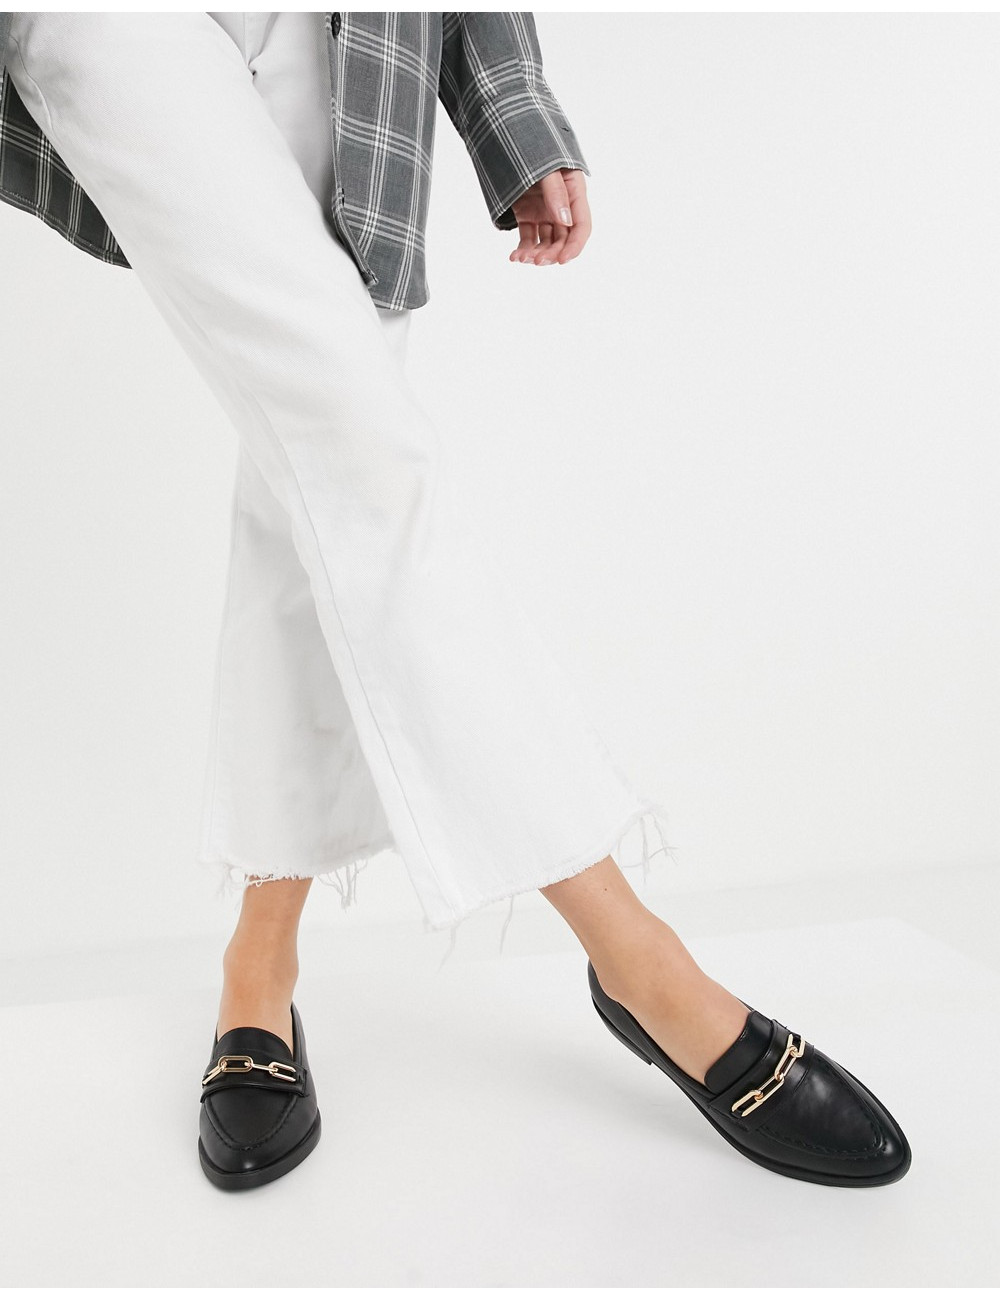 Glamorous loafers with gold...